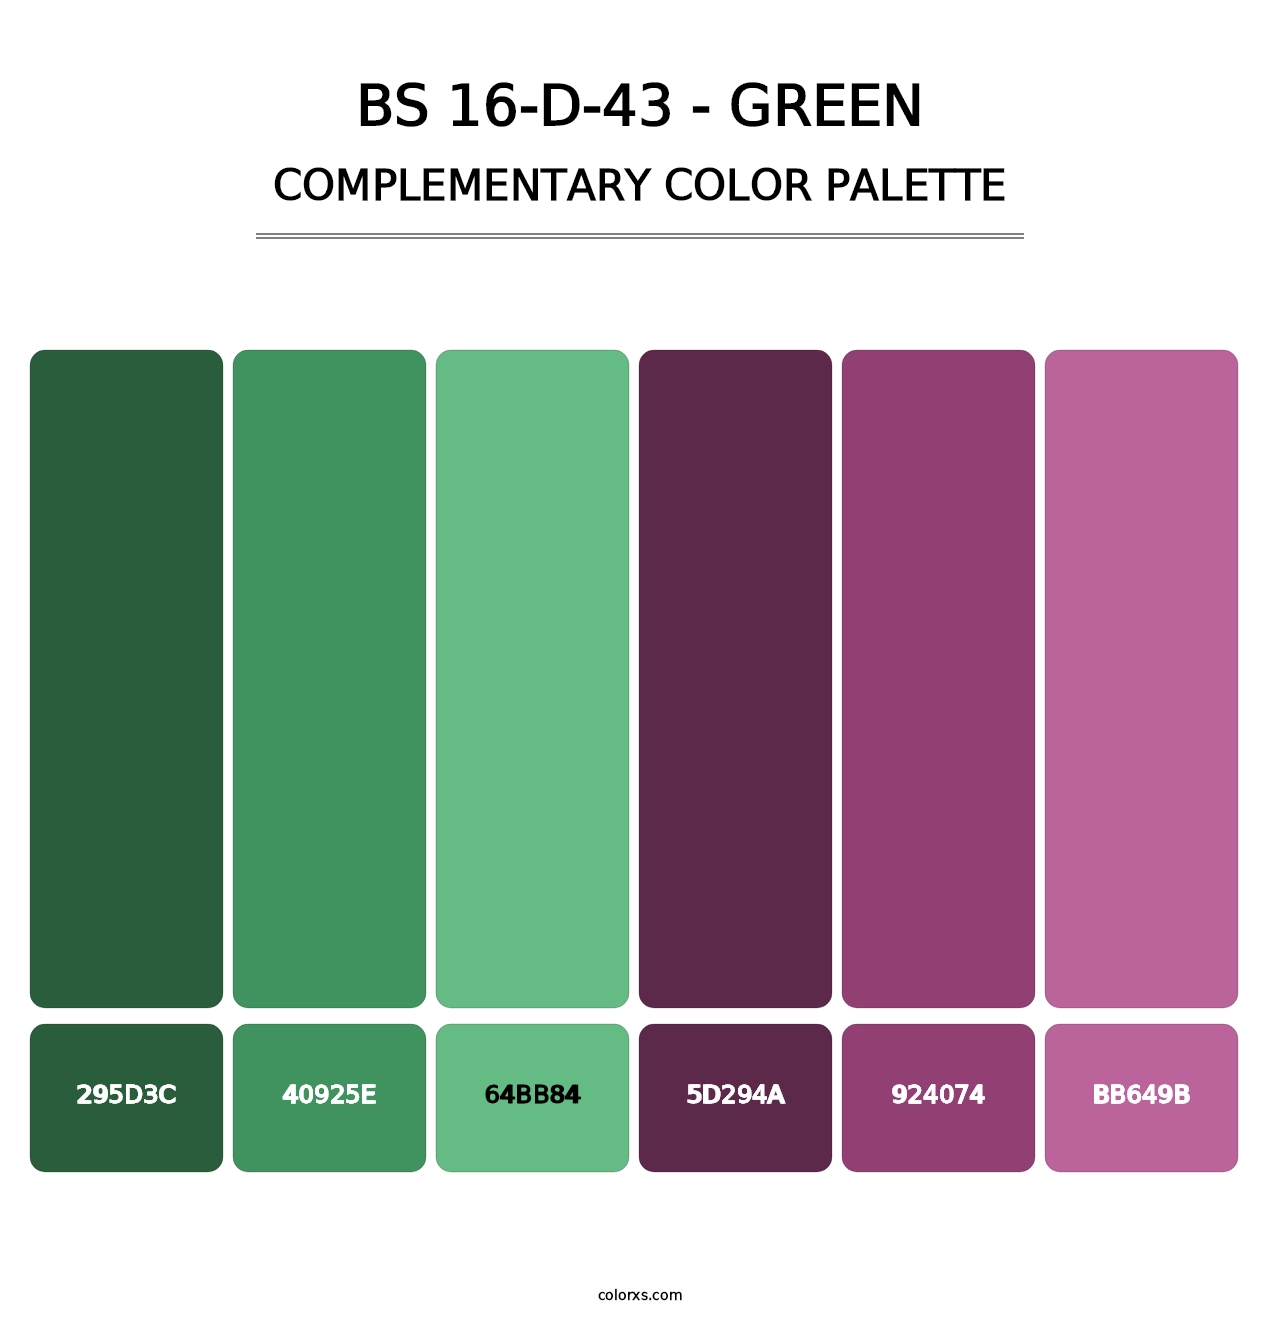 BS 16-D-43 - Green - Complementary Color Palette